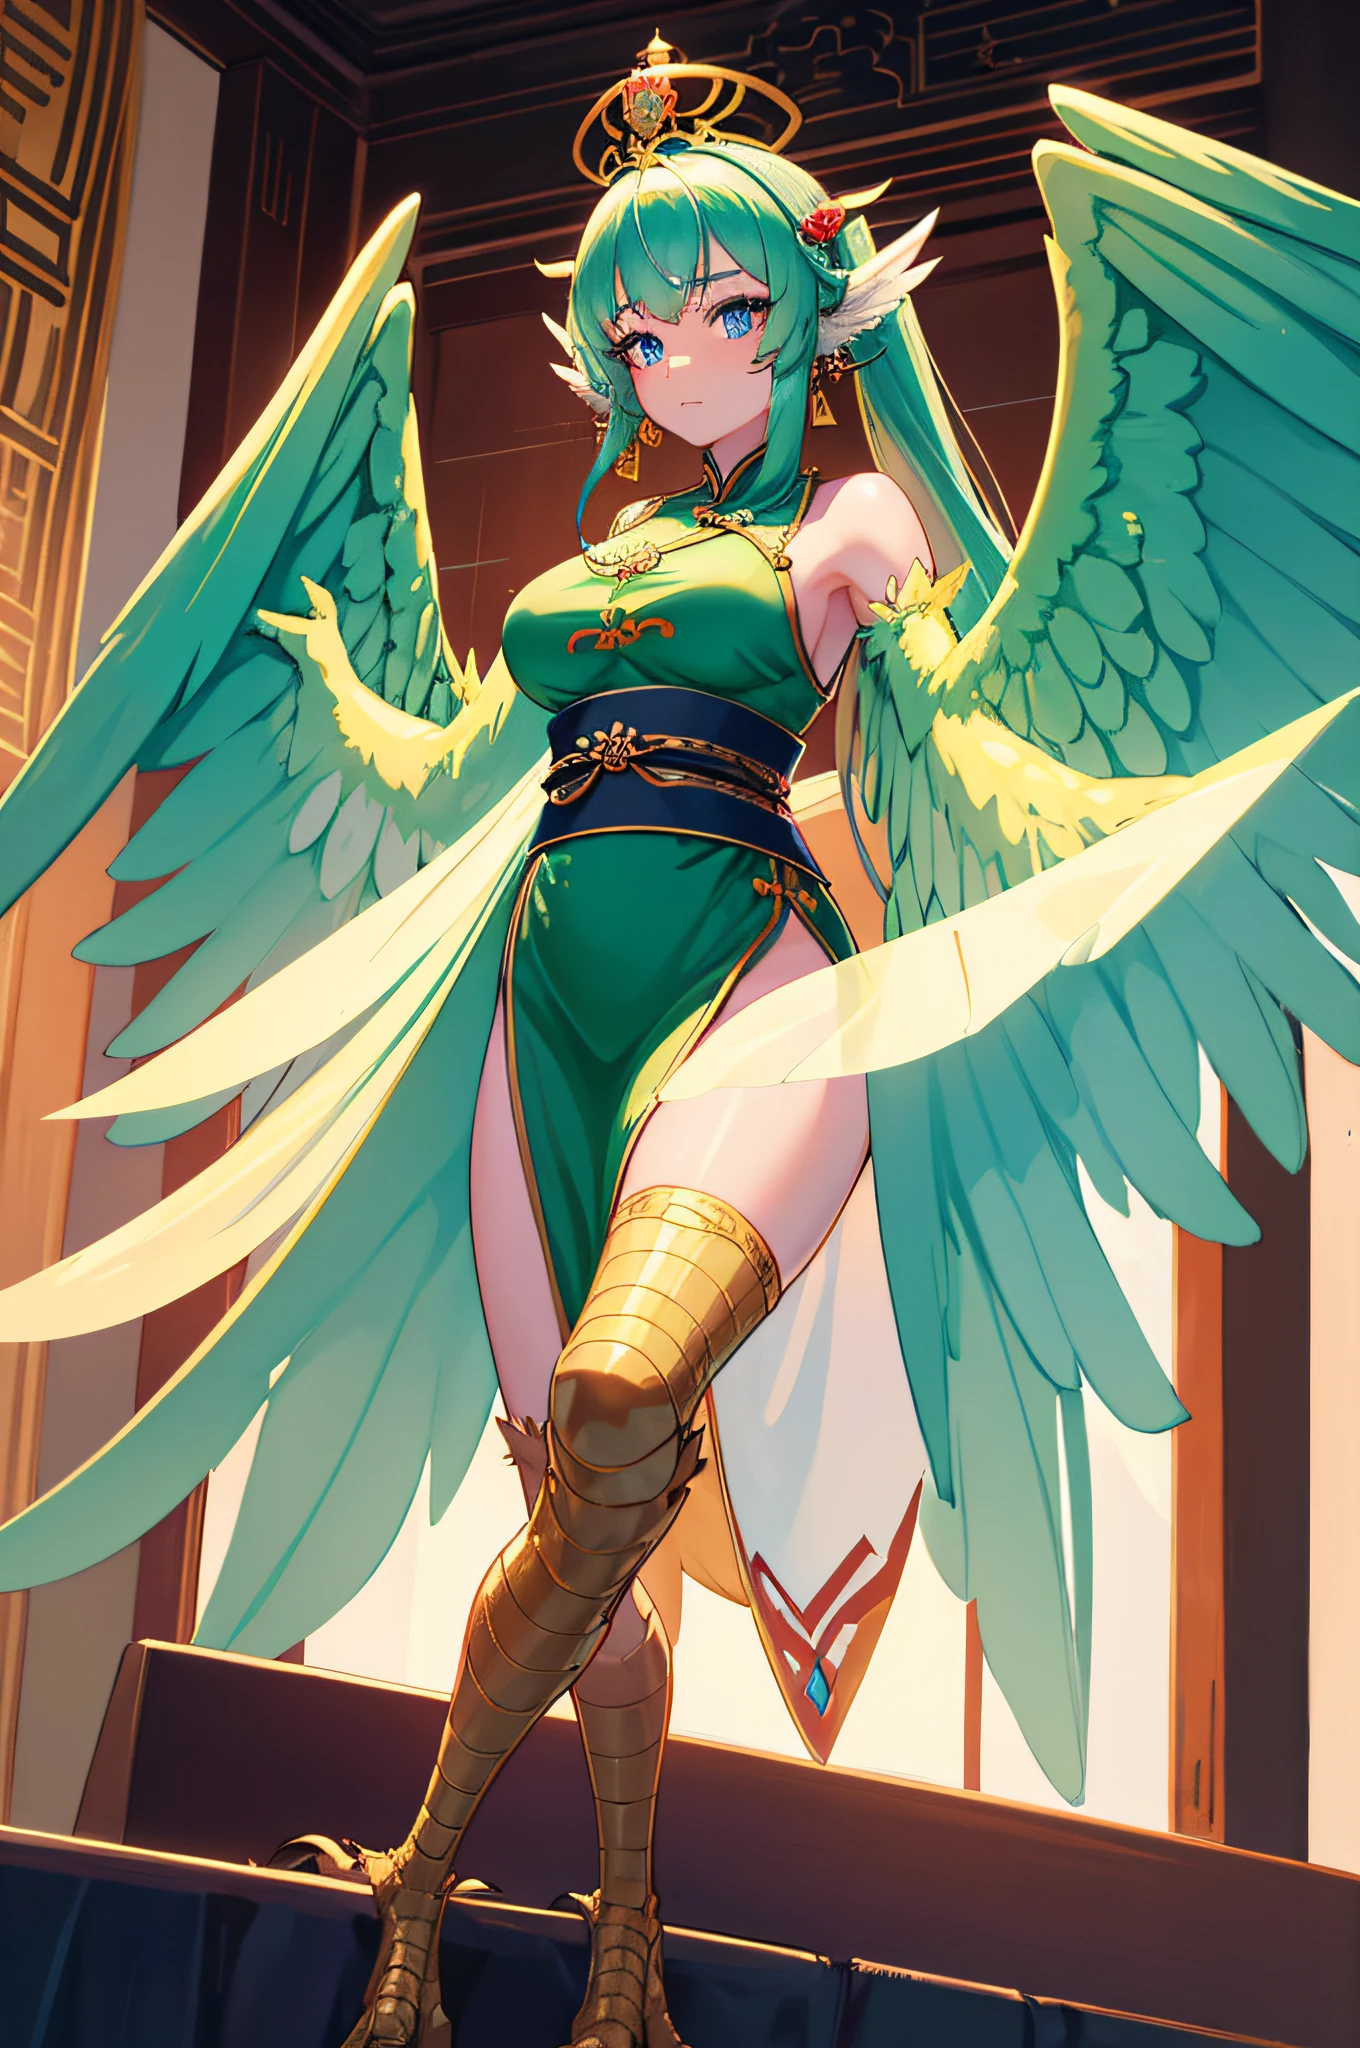 4k,hight resolution,One Woman,harpy,Green hair,poneyTail,Blue eyes,Sexy face,huge tit,snow-white wings,golden toenails,ancient chinese princess,fantasy cheongsam dress,ancient chinese crown,jewel decorations,Inside the royal family